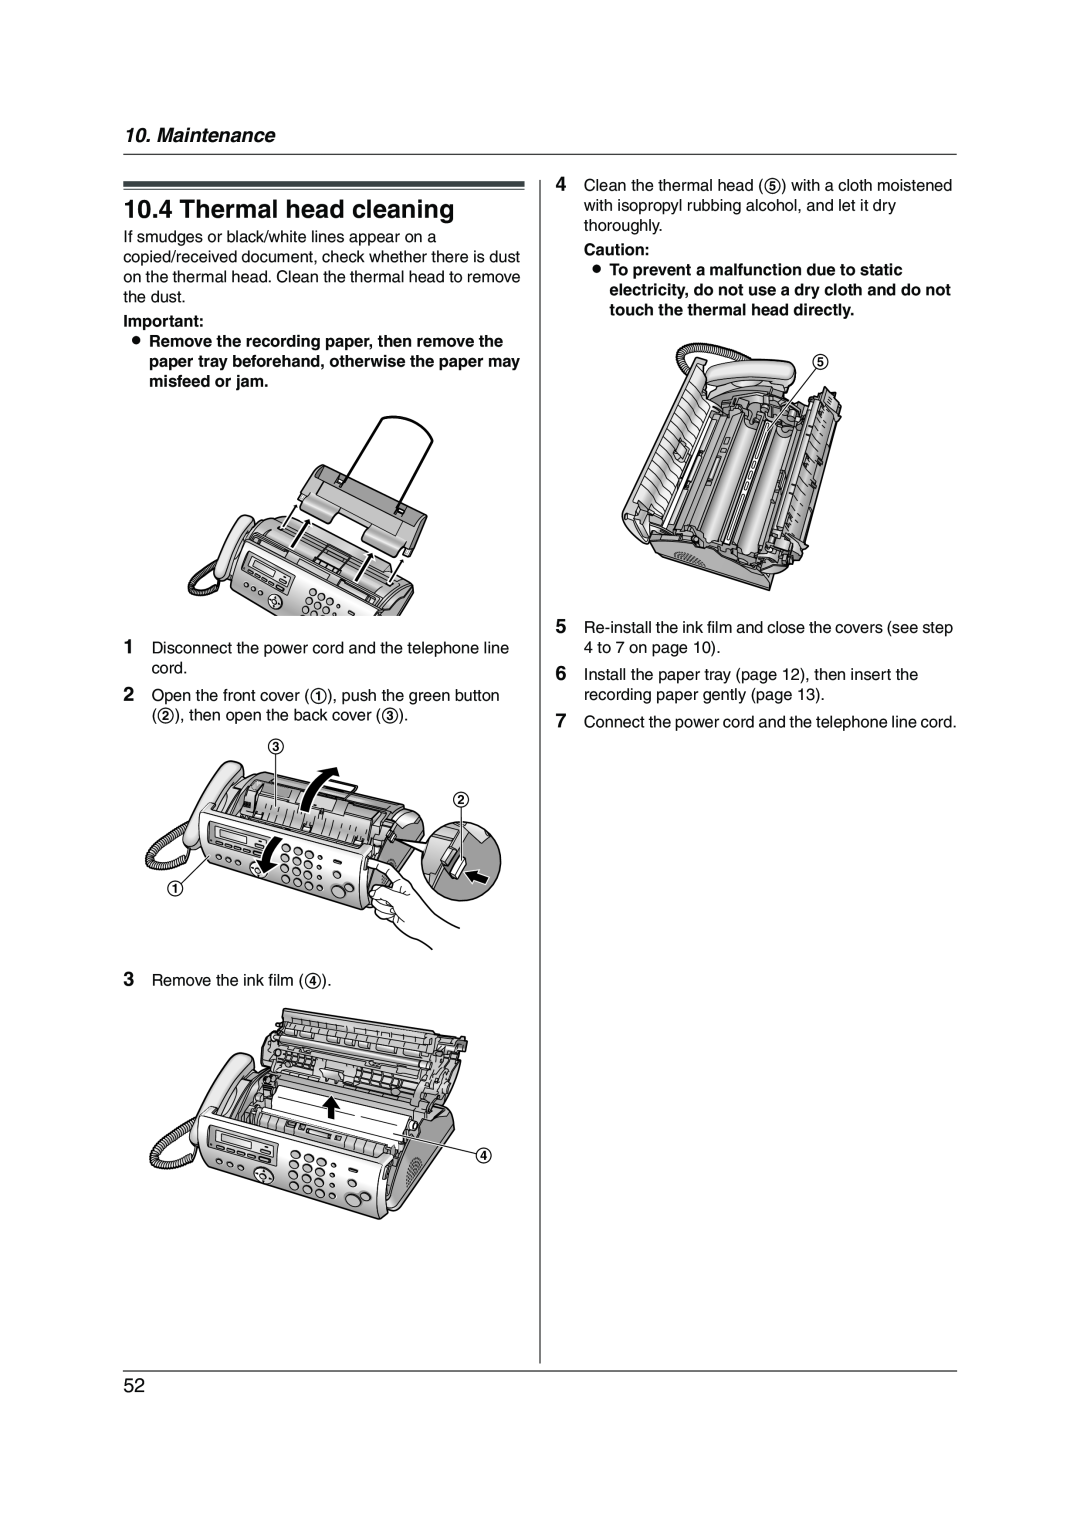 Panasonic KX-FP215 operating instructions Thermal head cleaning, Maintenance 